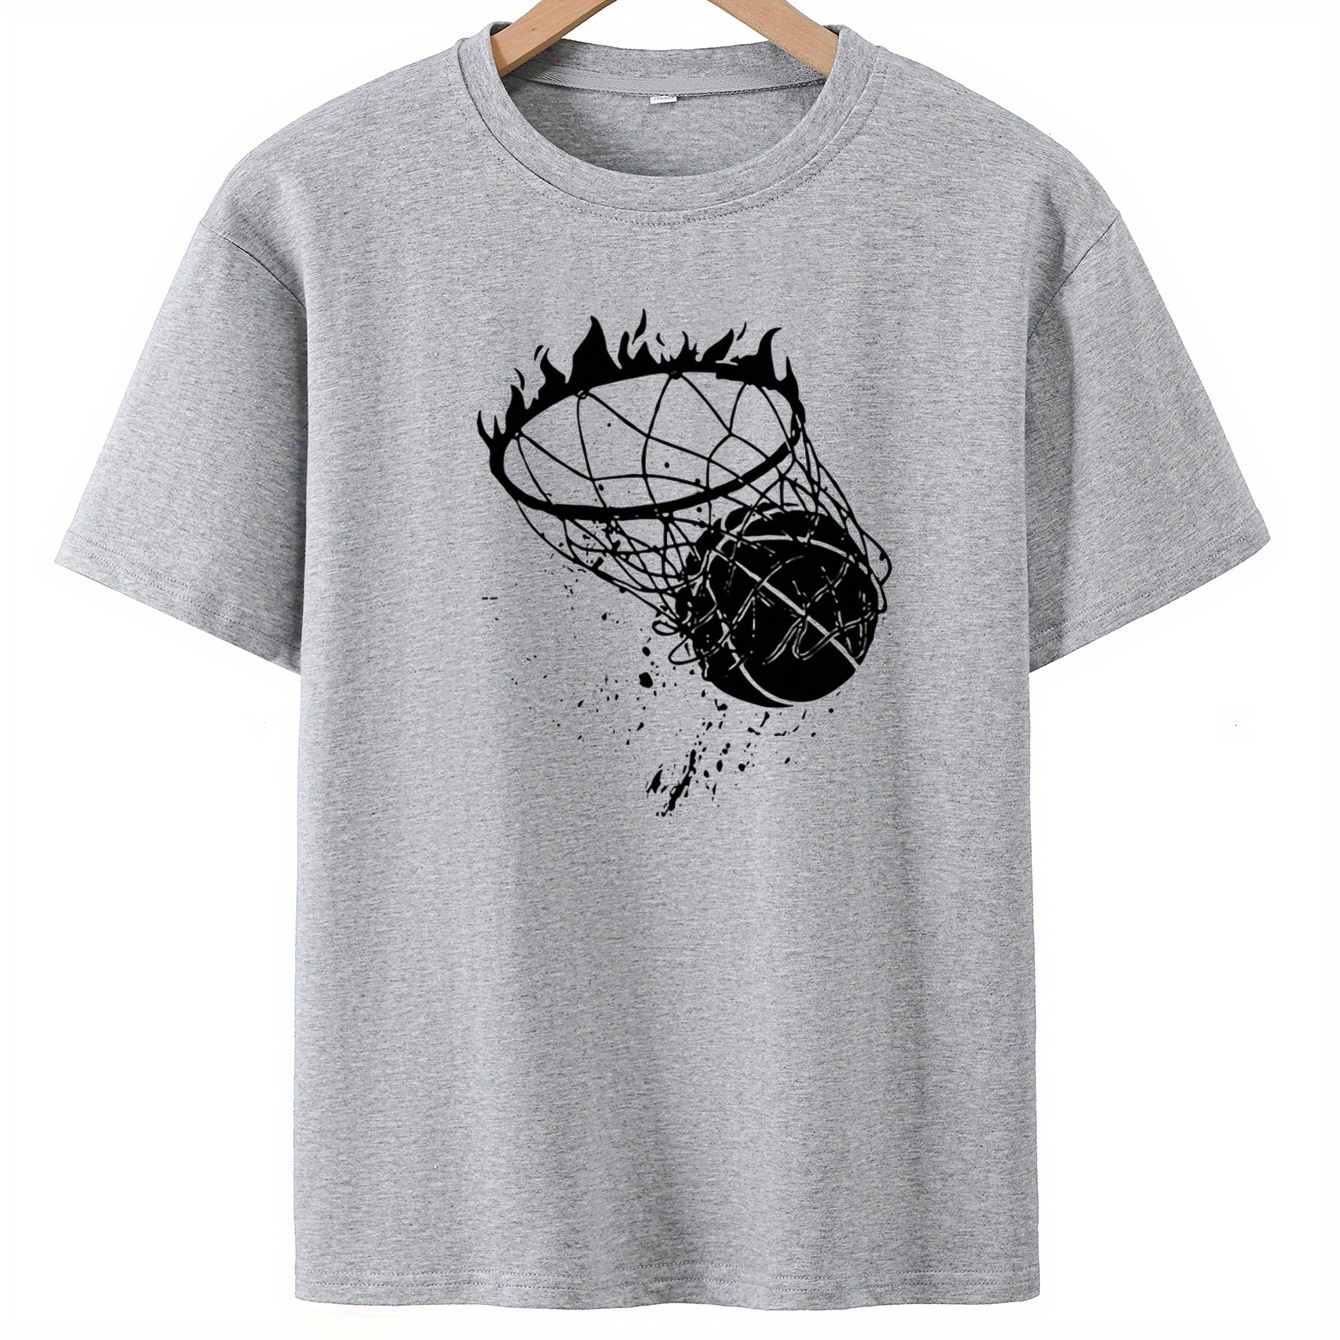 

Basketball Print T-shirt For Boys, Short Sleeve Casual Top, Summer Outdoor Daily Wear